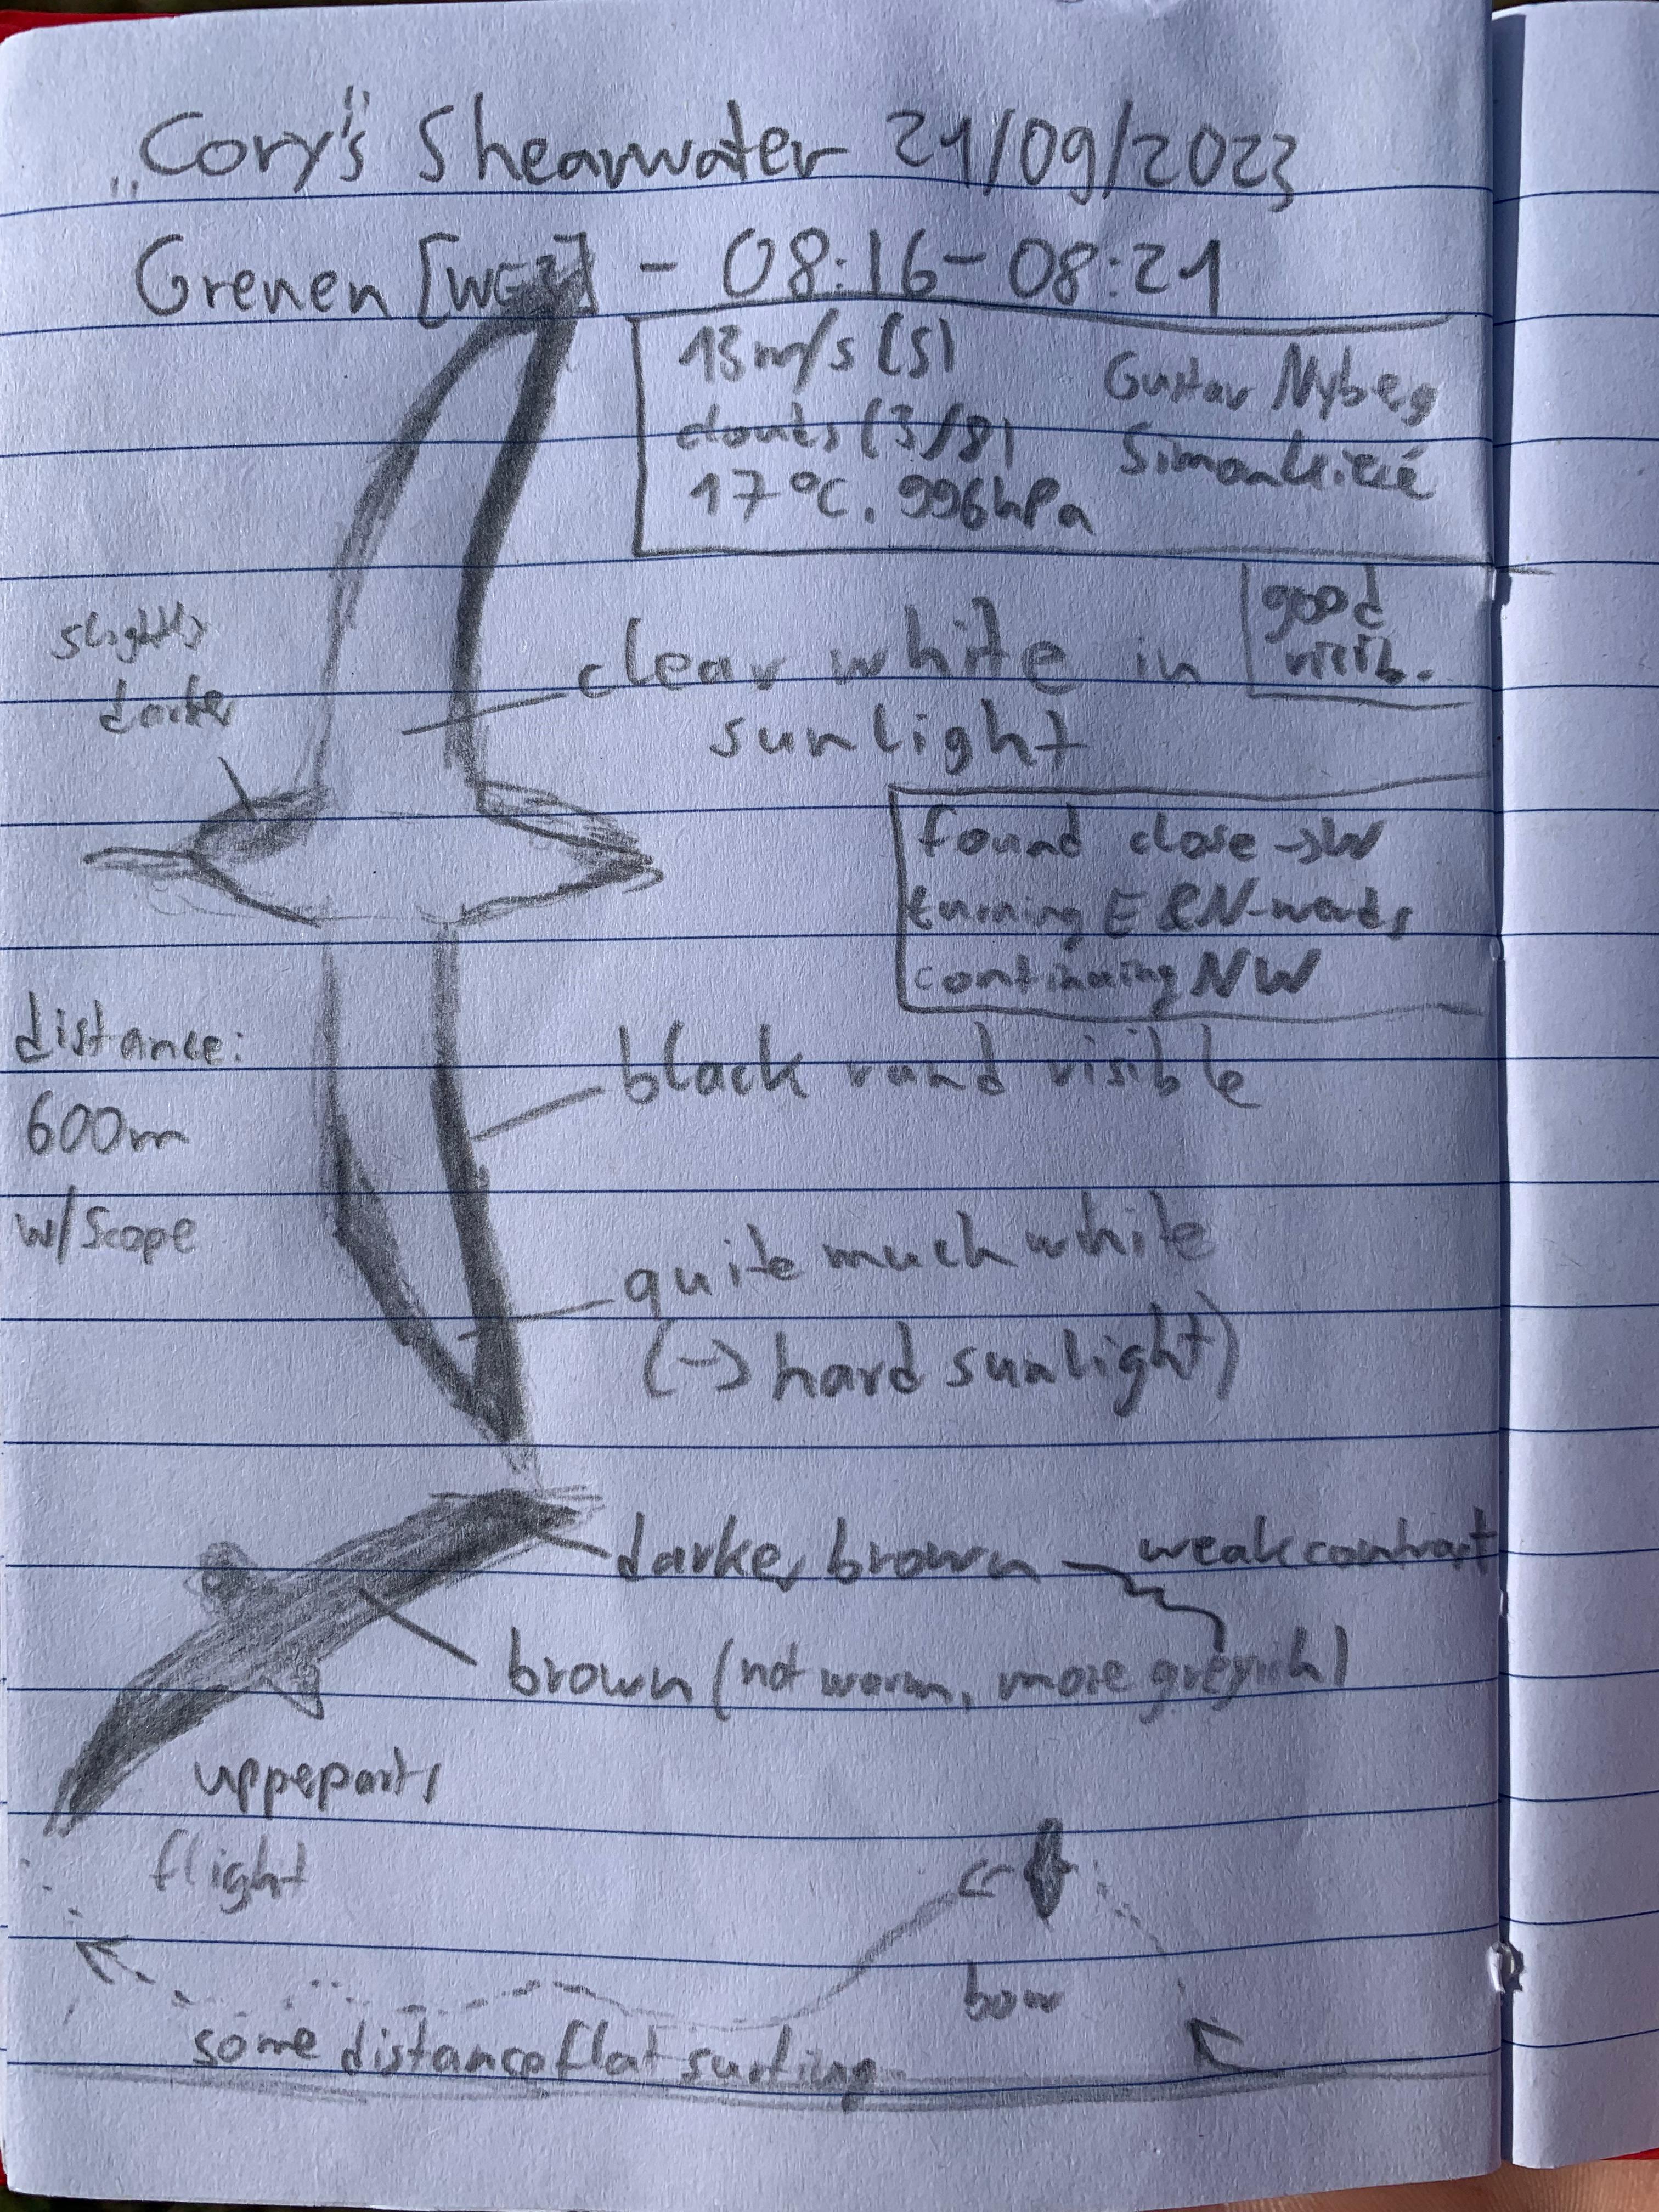 21.09.23 Corys Shearwater notes